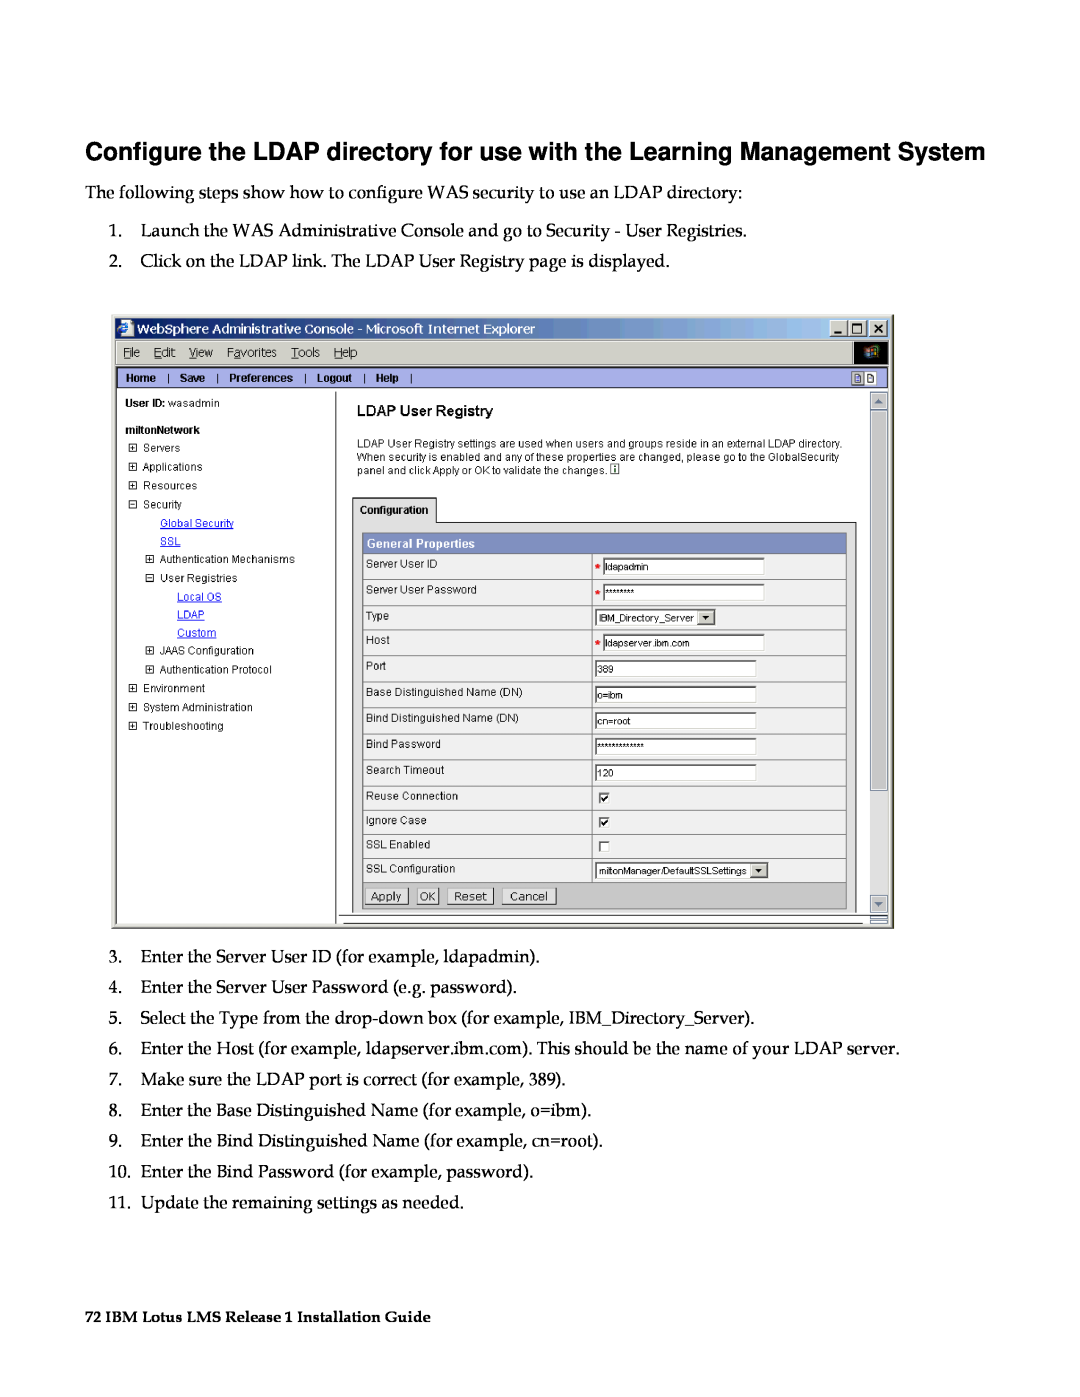 IBM G210-1784-00 manual Click on the LDAP link. The LDAP User Registry page is displayed 